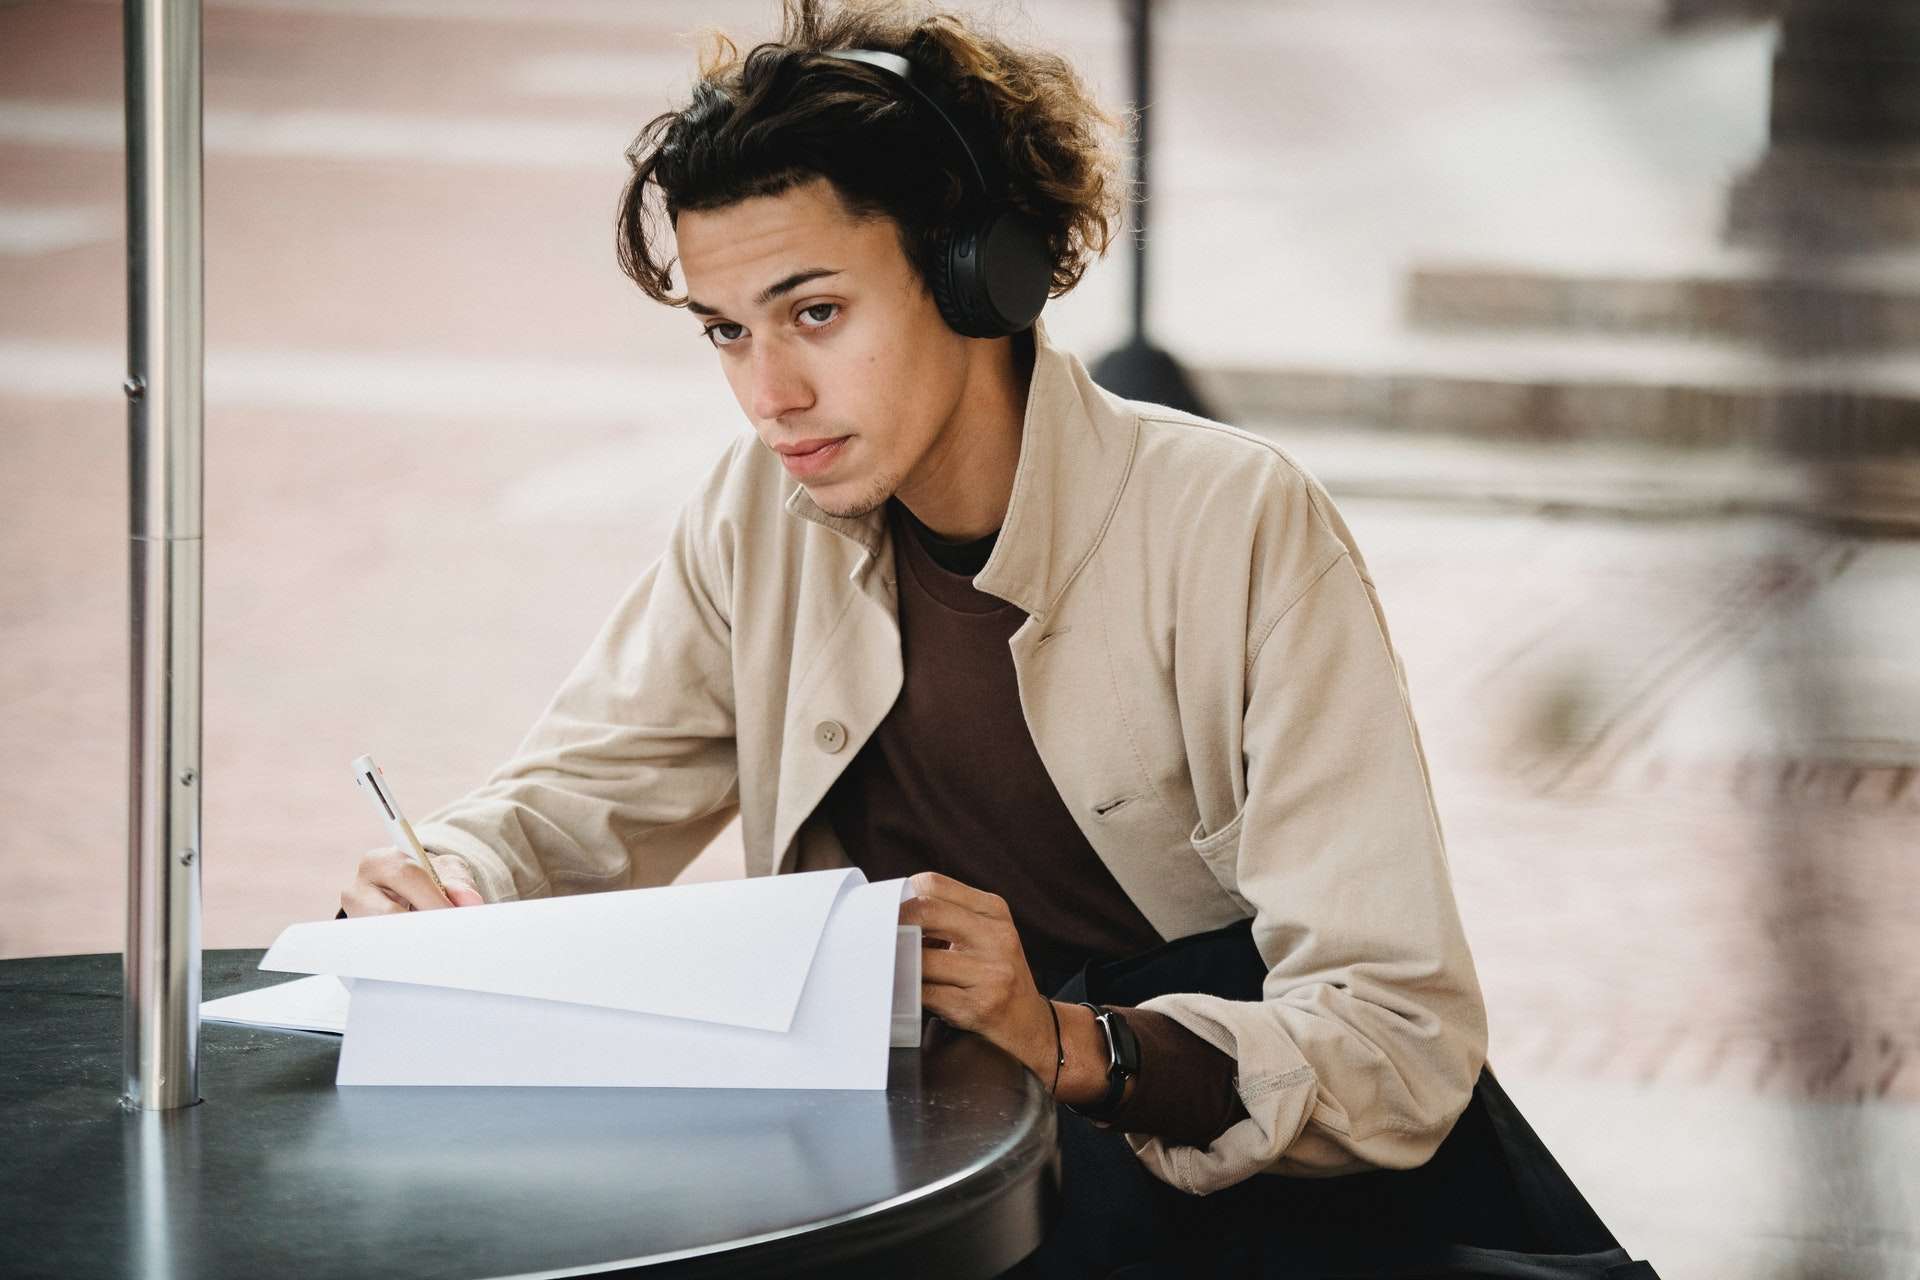 A Student Learning With Headphones On At The Campus